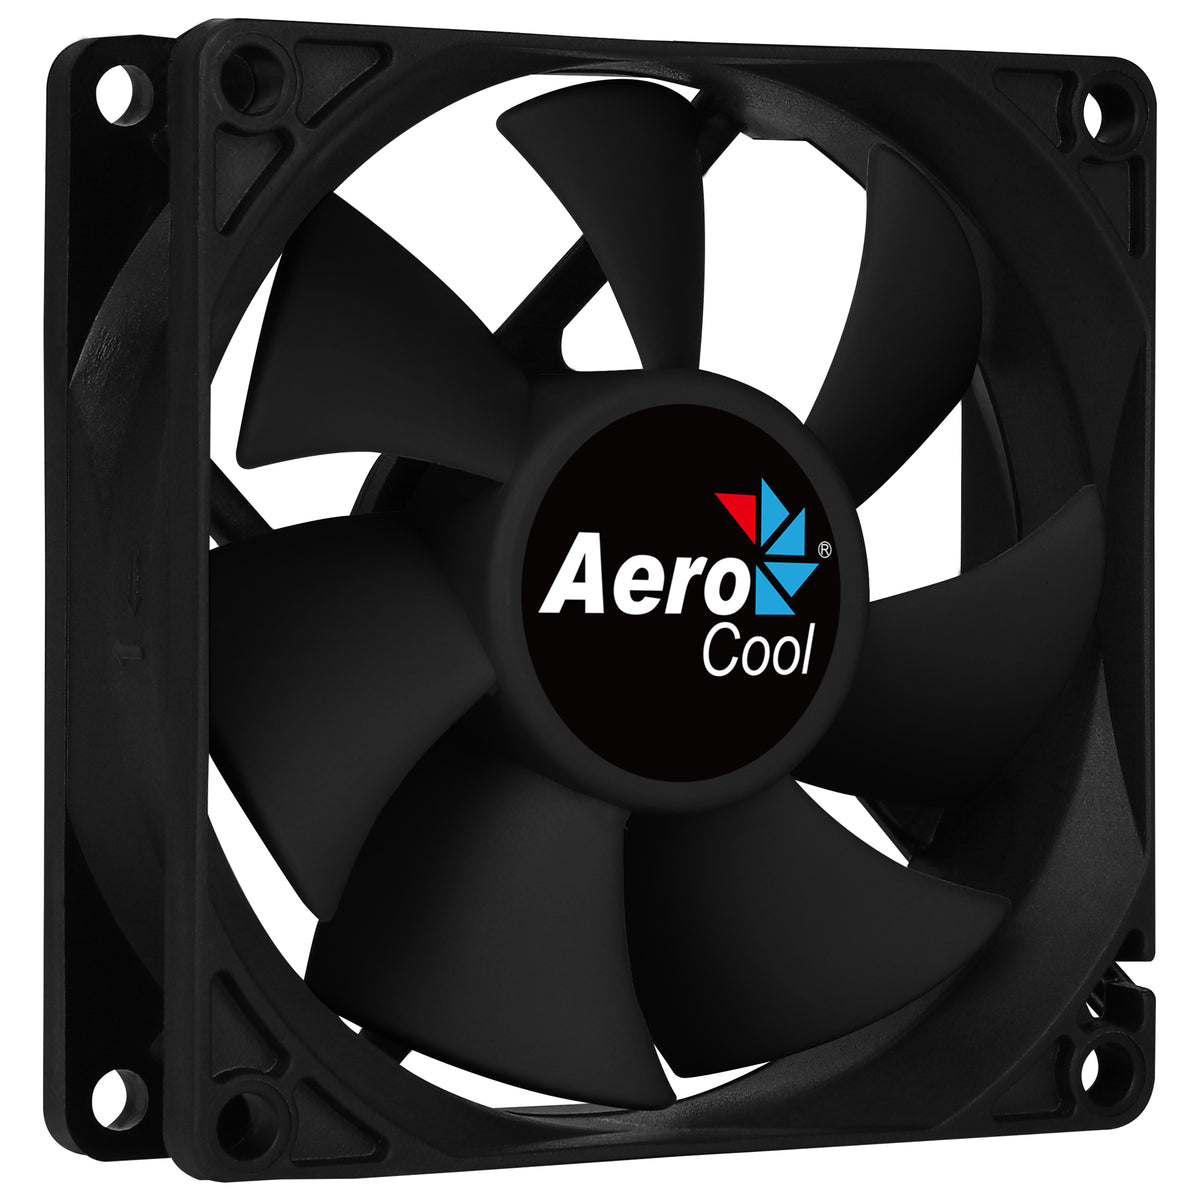 VENTOINHA AEROCOOL FORCE FAN, 120MM, BLACK, 3&4PIN, CURVED BLADES, SILENT, 1000RPM (FORCE12BK)